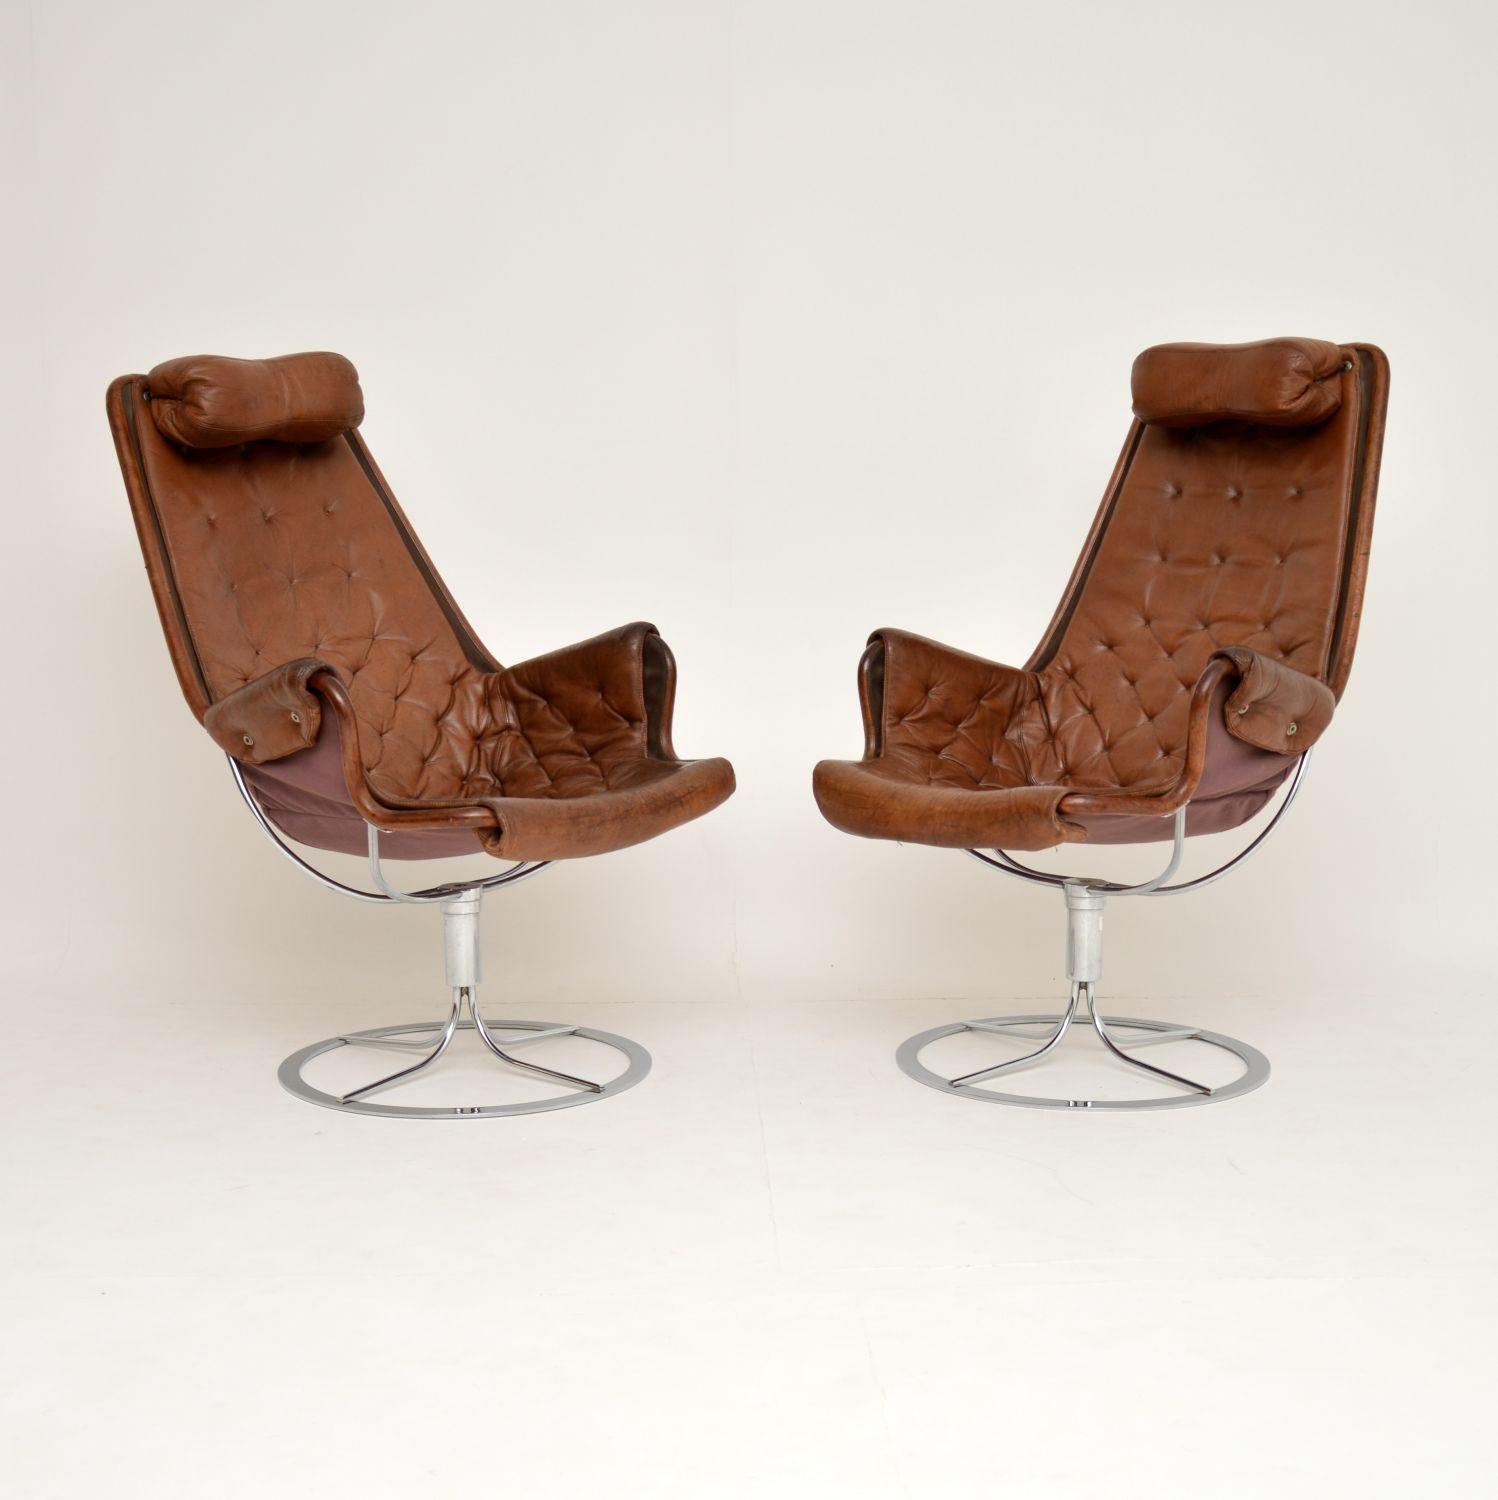 A stunning and iconic design, these are Jetson chairs, designed by Bruno Mathsson. They were made in Sweden by DUX, they date from the 1960s-1970s. The quality is amazing, they have a gorgeous look with the leather seats contrasting nicely with the